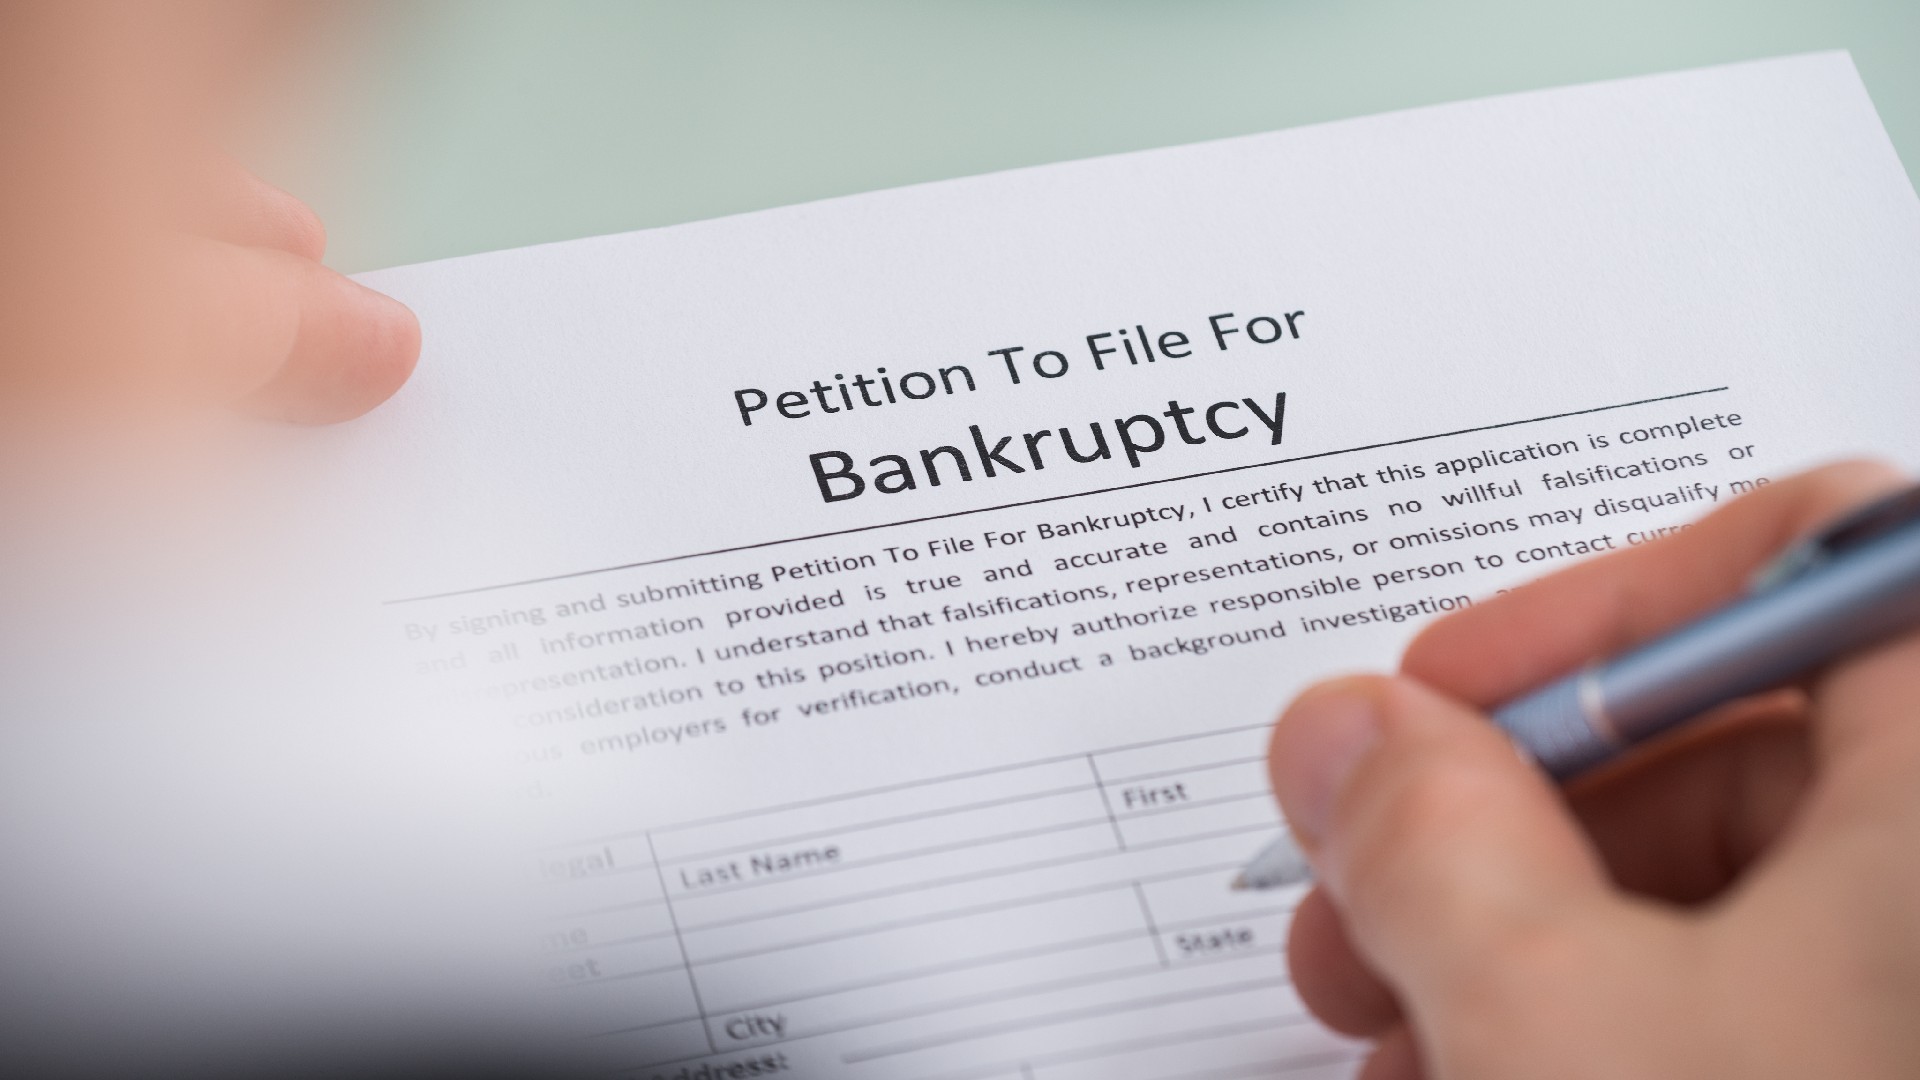 A person fills out a petition to file for bankruptcy